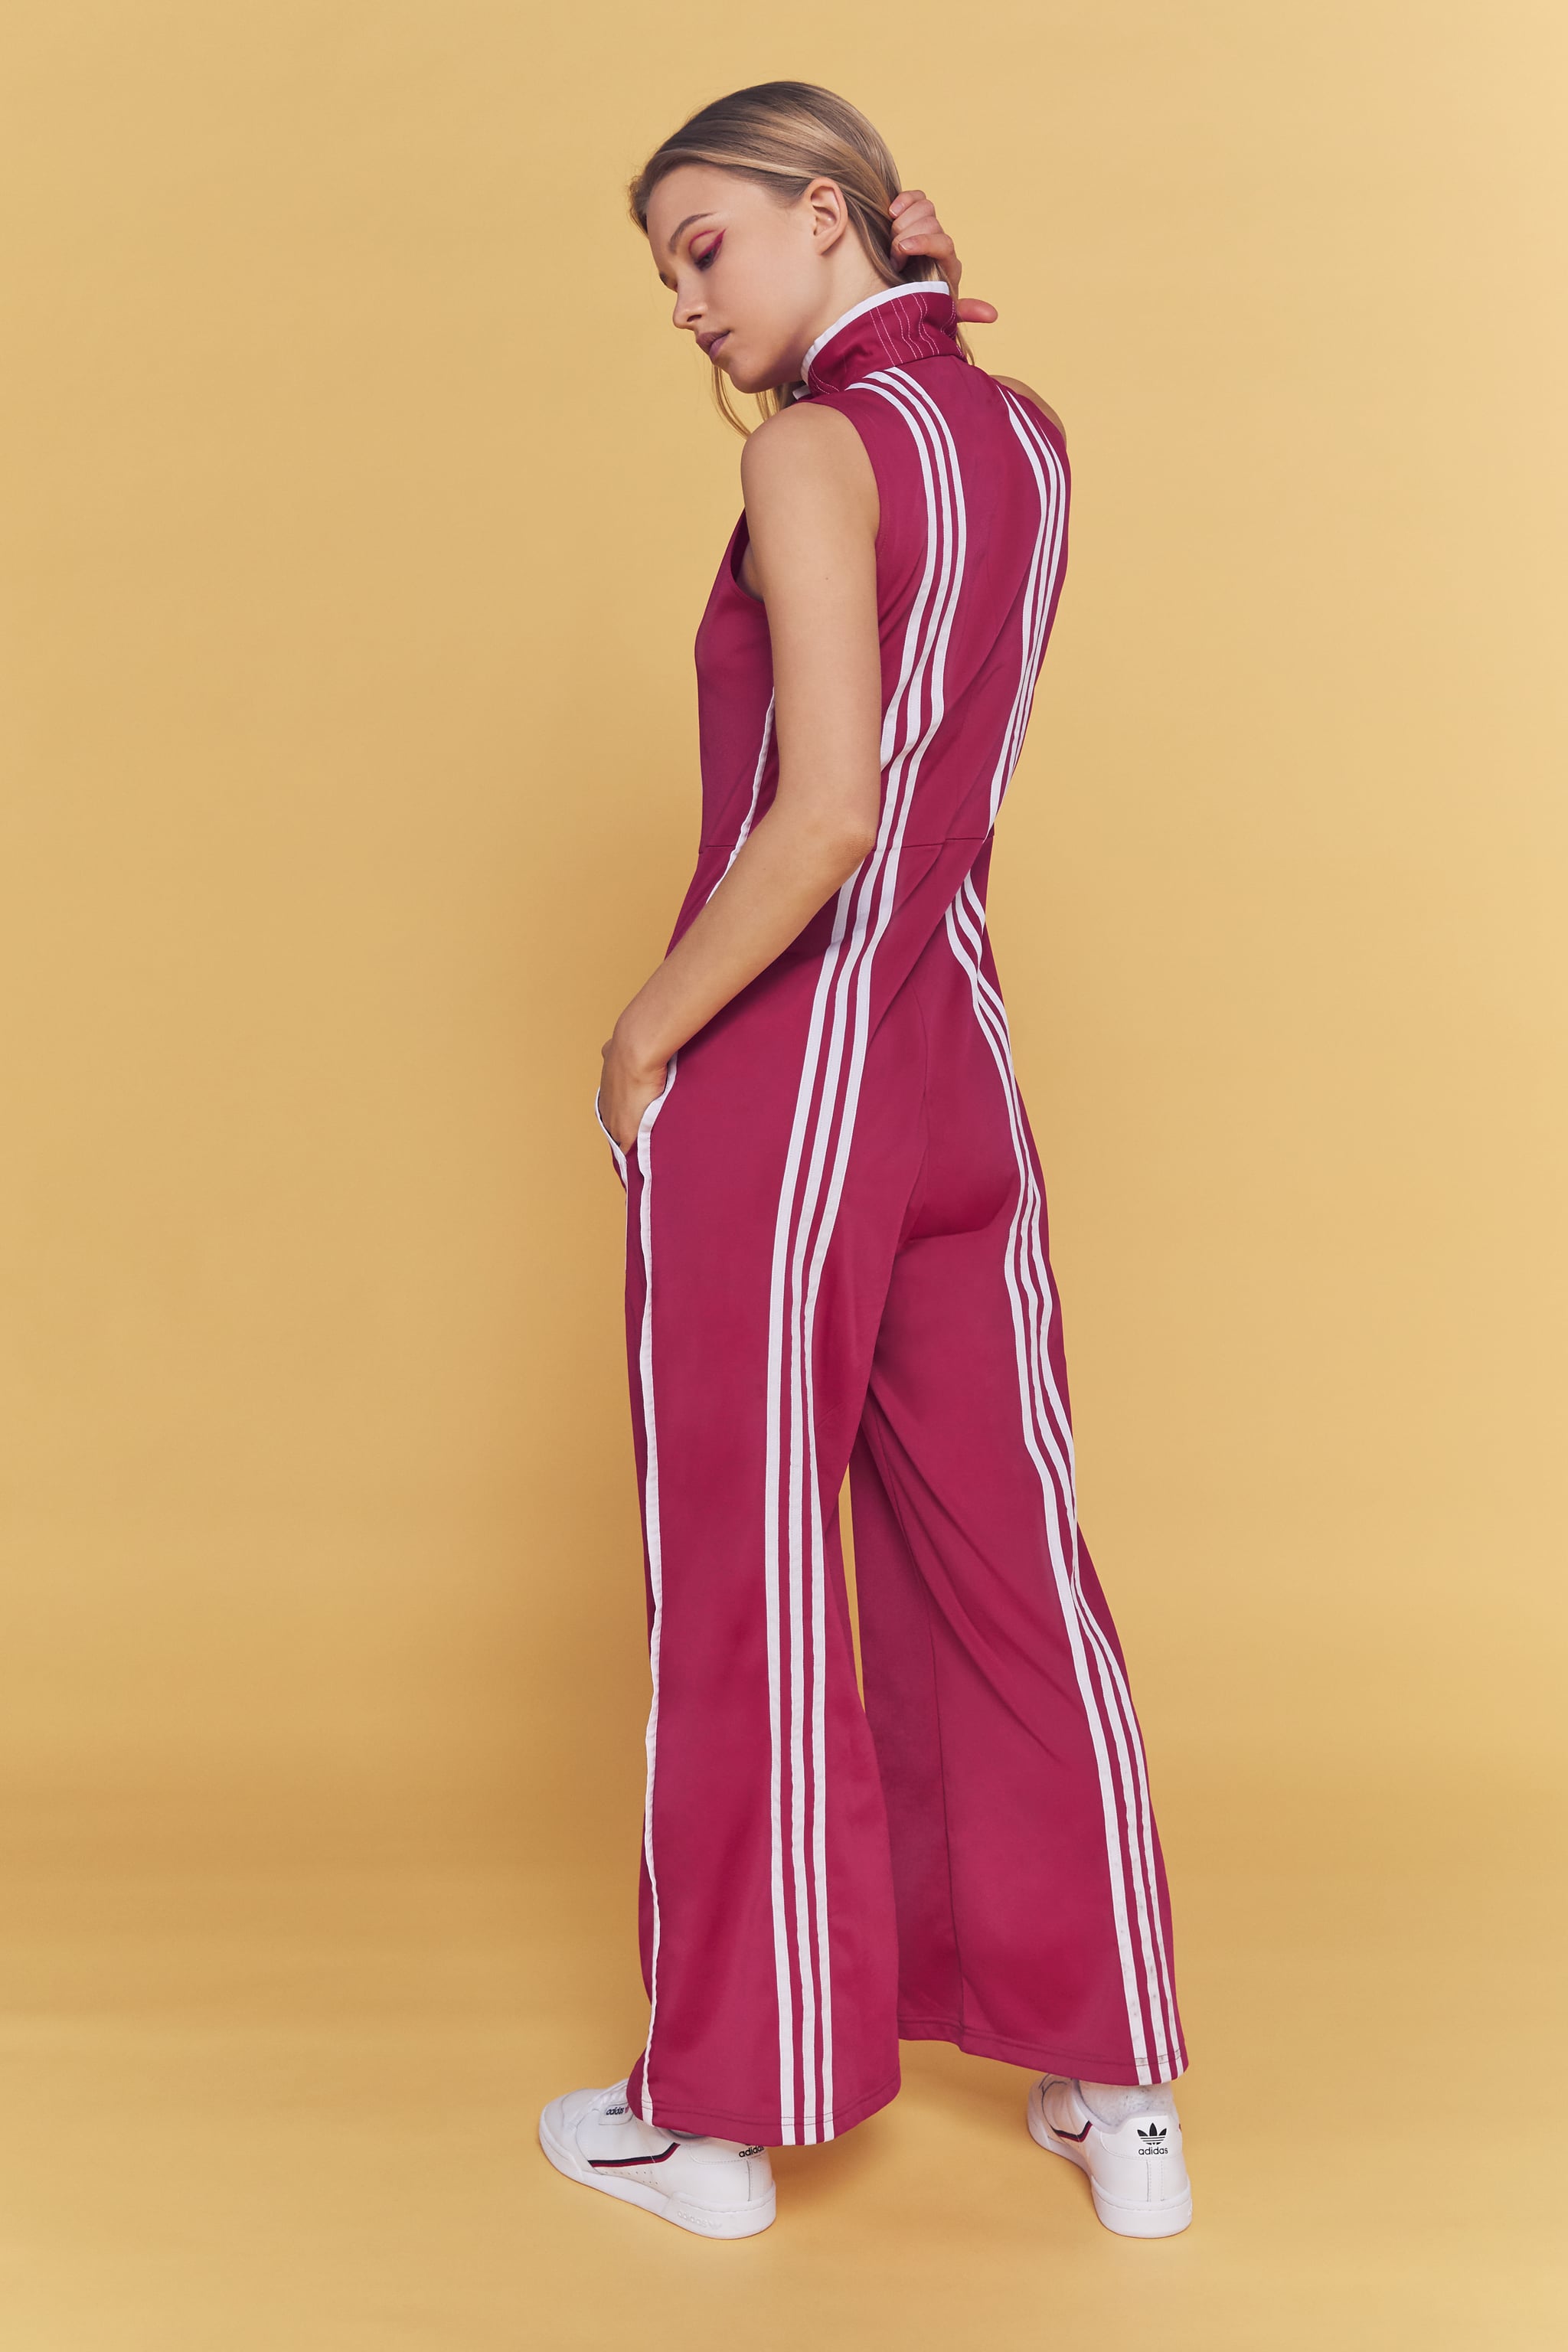 Adidas Originals By Ji Won Choi 3-Stripe Snap Button | Kendall Jenner's Adidas Tracksuit Just at Urban Outfitters, You Know What to Do POPSUGAR Fashion Photo 6